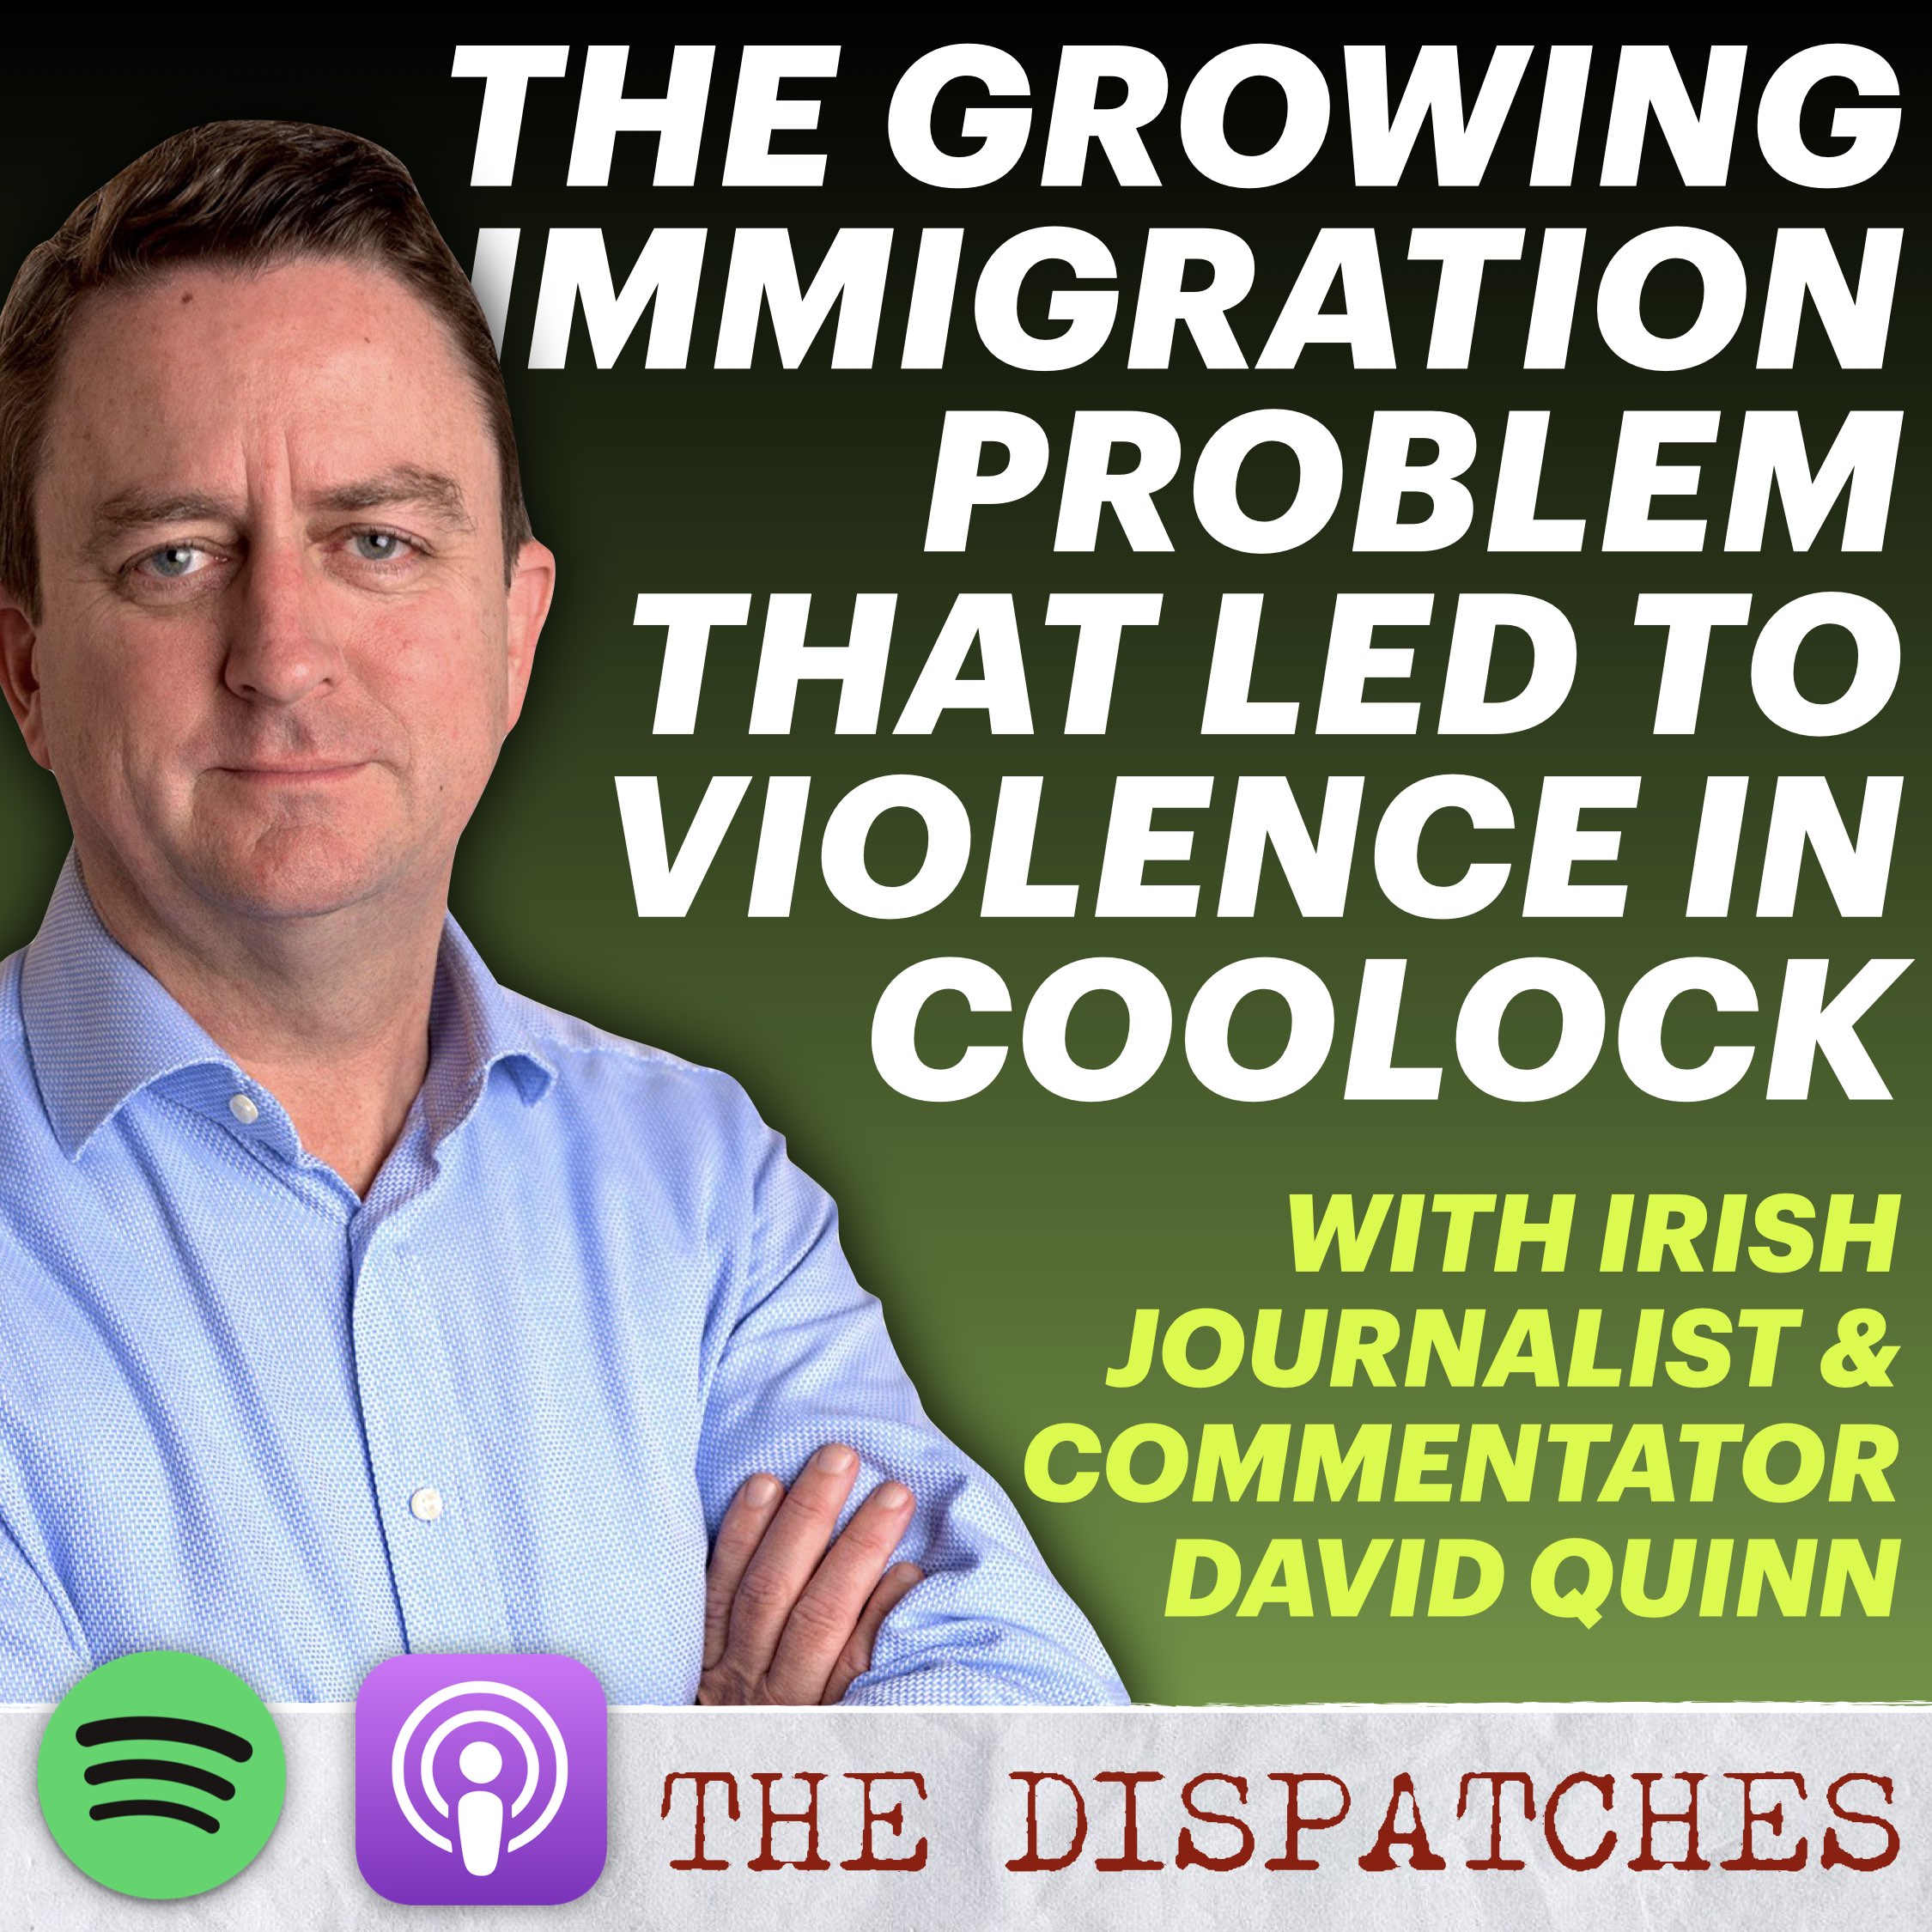 The Growing Immigration Crisis That Led to Violence in Coolock